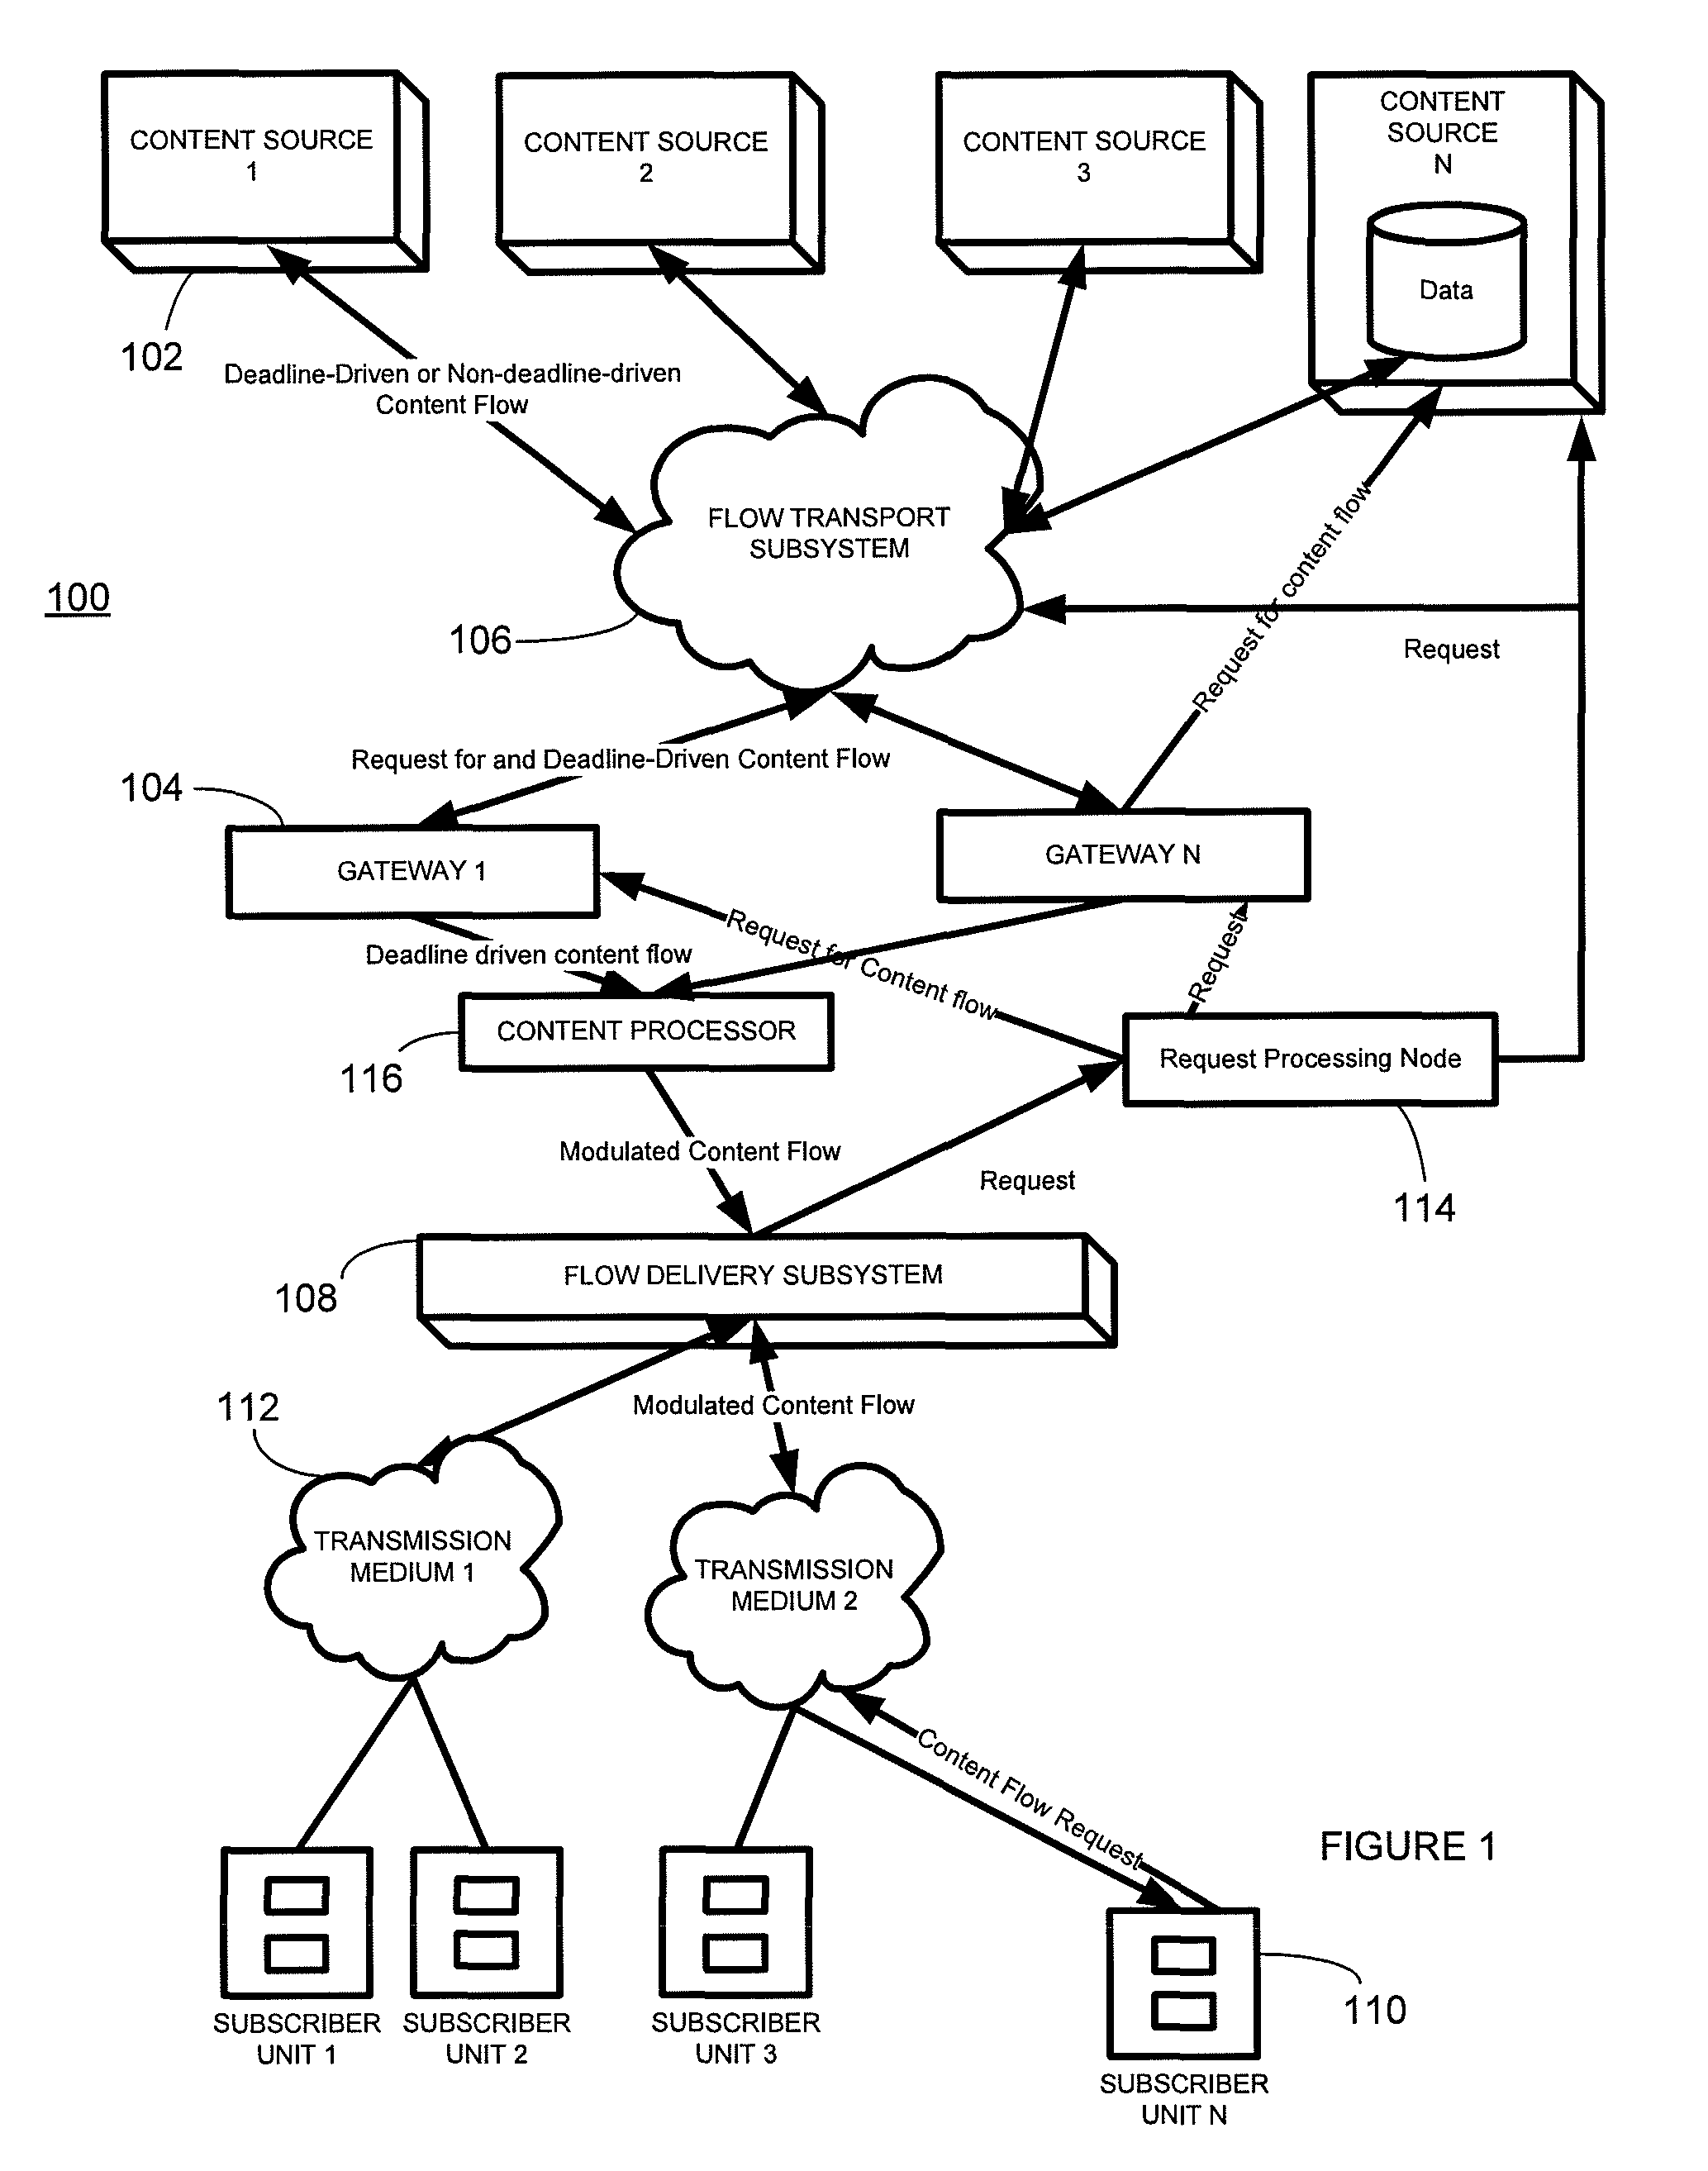 Method for delivery of deadline-driven content flows over a flow transport system that interfaces with a flow delivery system via a selected gateway